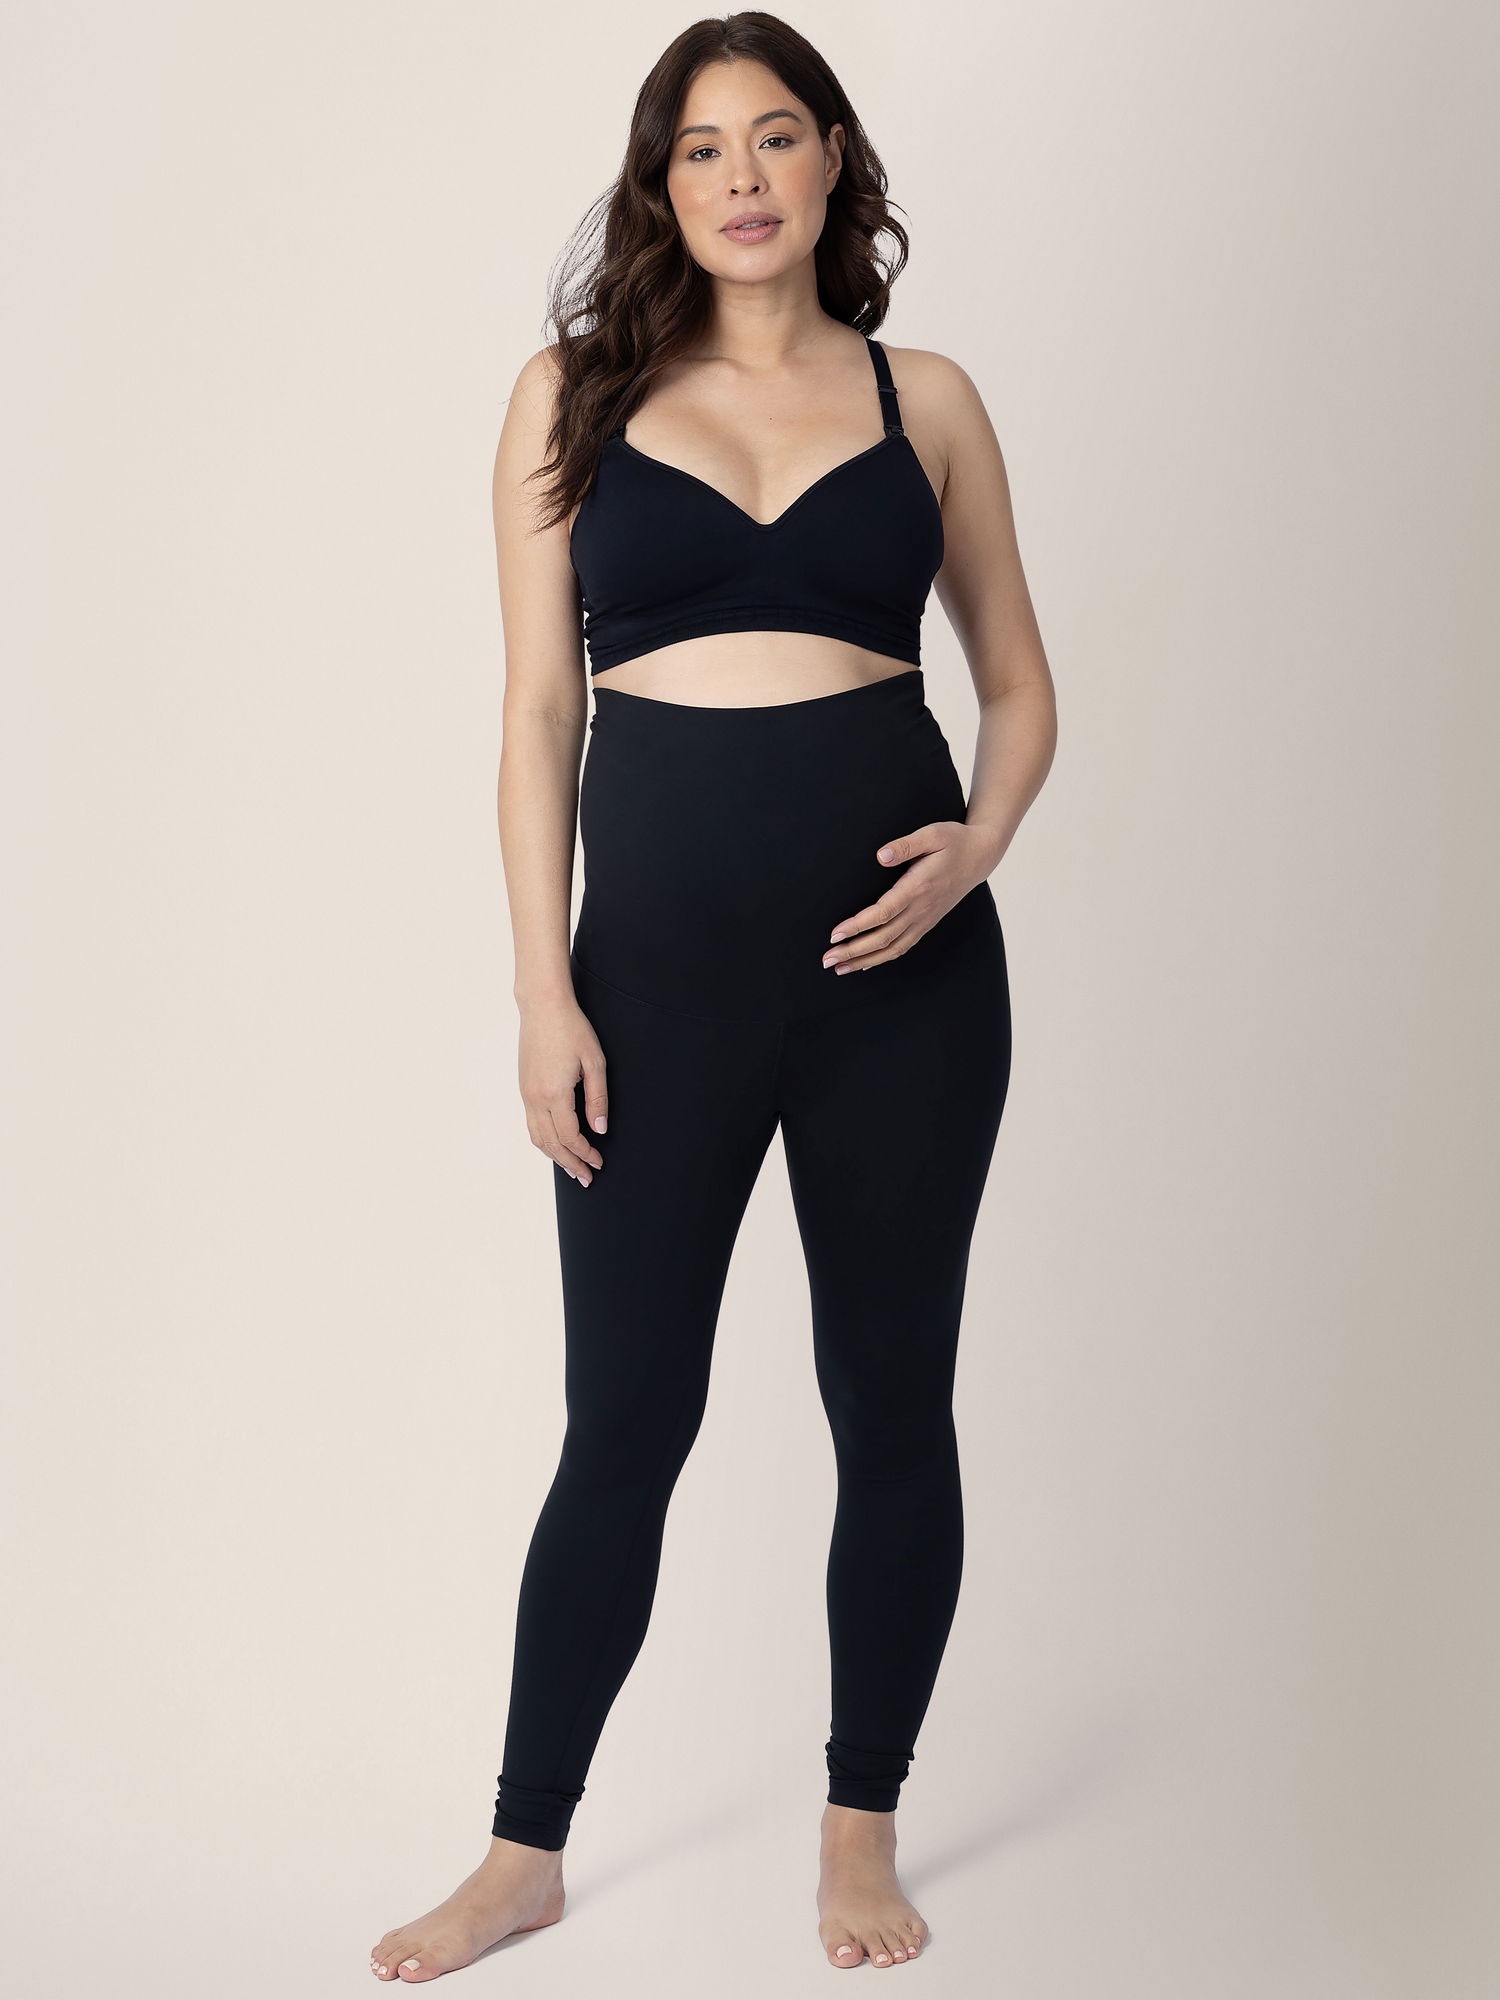 Green With Envy Moto Maternity Leggings – Mums and Bumps